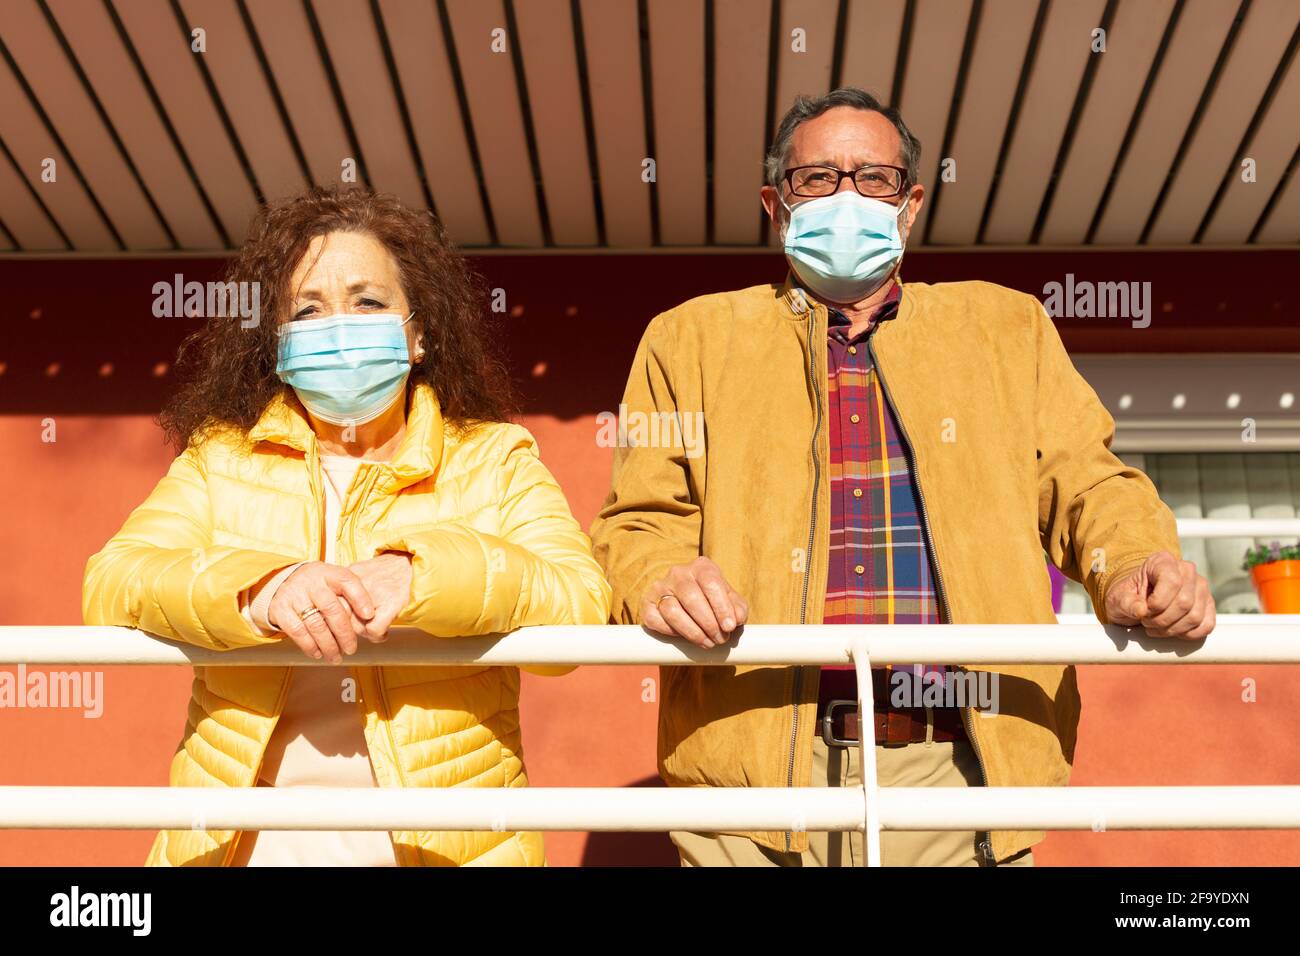 Portrait of two senior citizens observing the outside from the porch of their home. They are wearing a protective mask to prevent the Covid-19 virus. Stock Photo